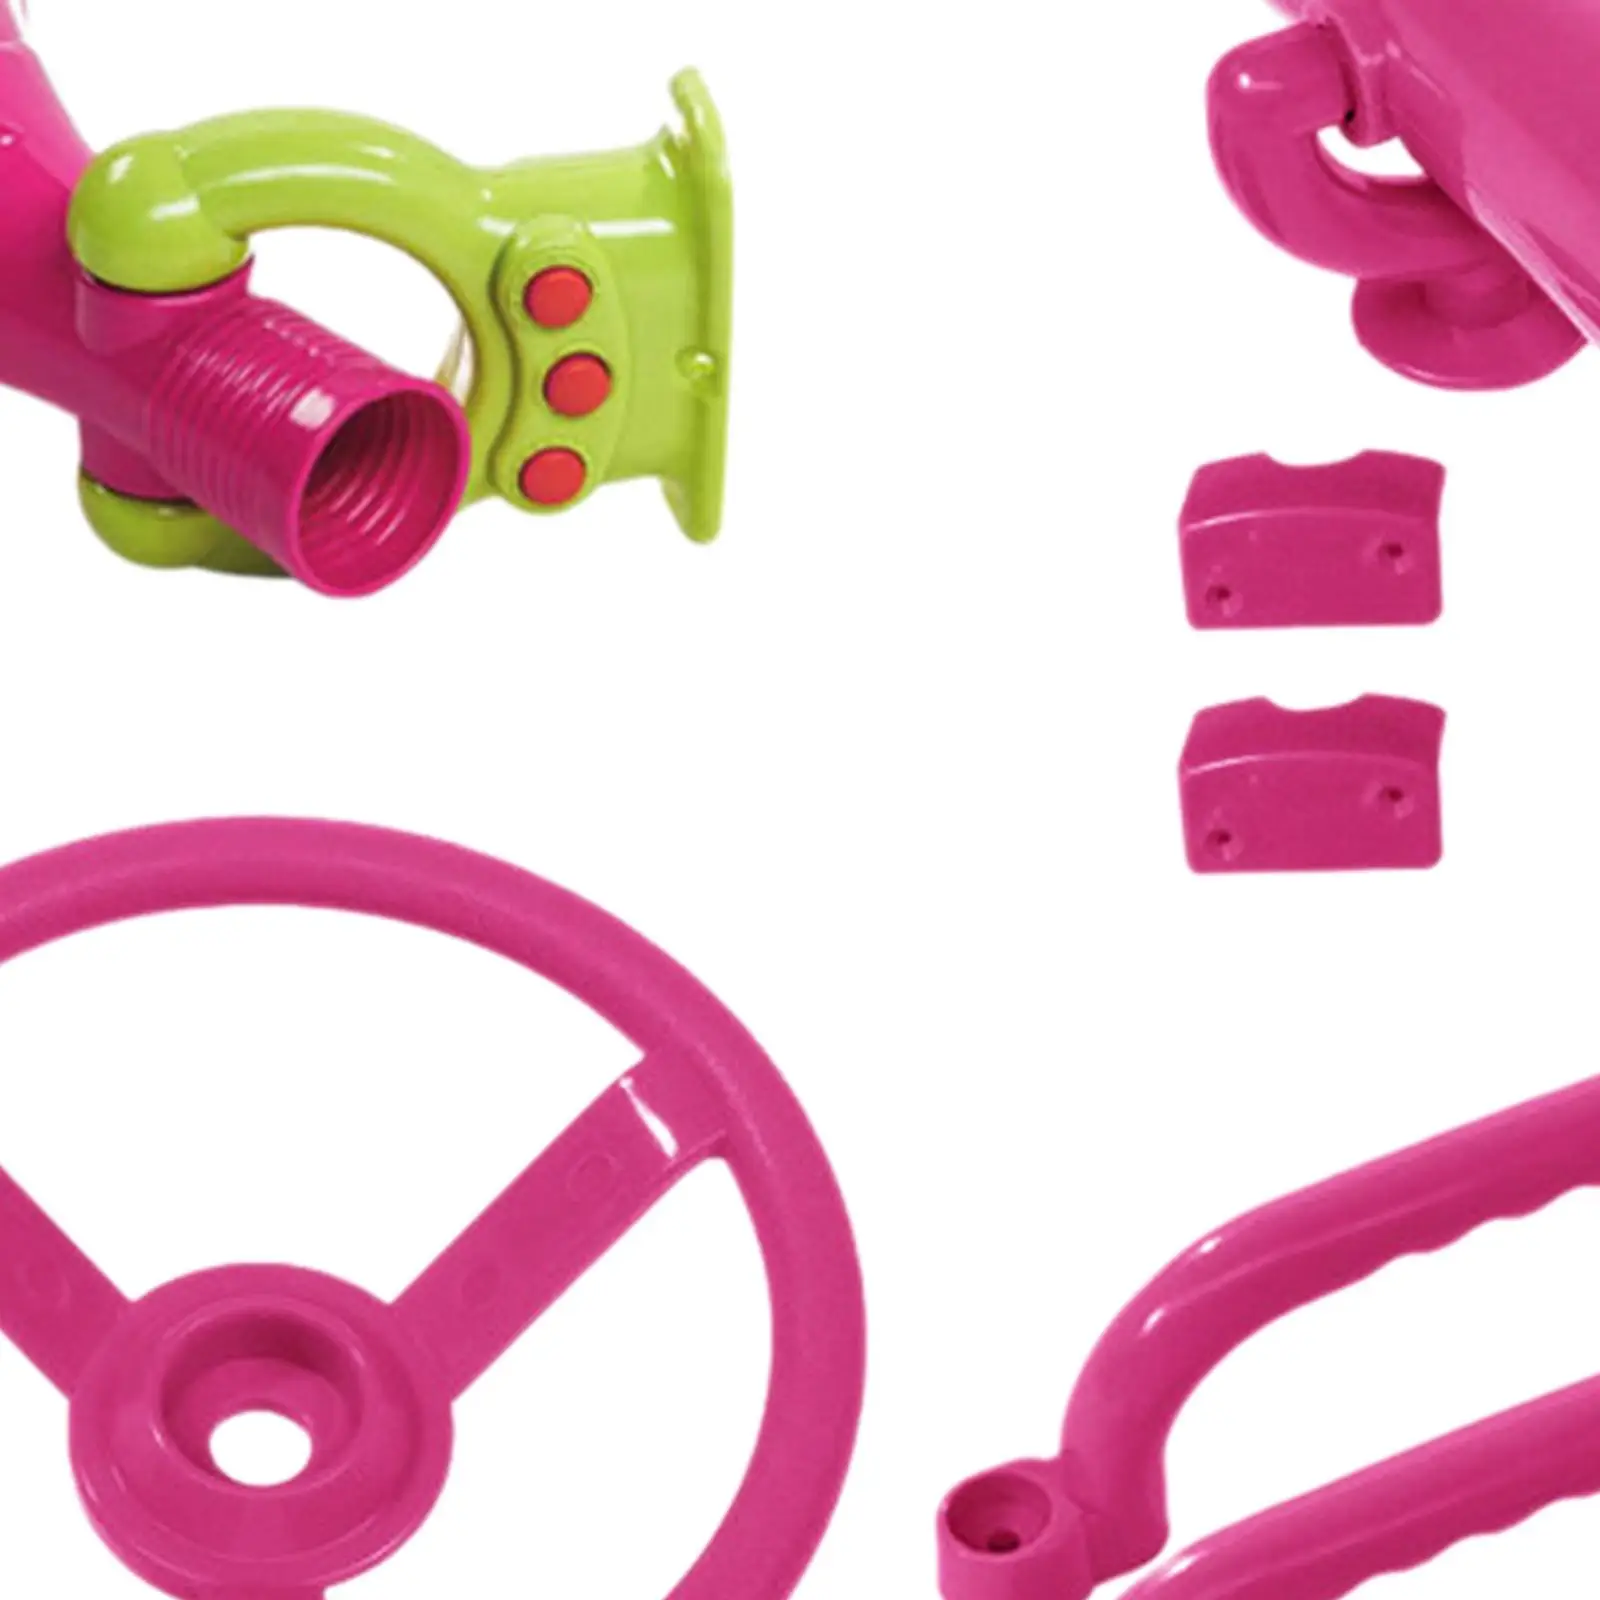 4x Playground Accessories Pink Playset Handles Pirate Ship Wheel for Kids for Backyard Swingset Outdoor Playhouse Boys Girls